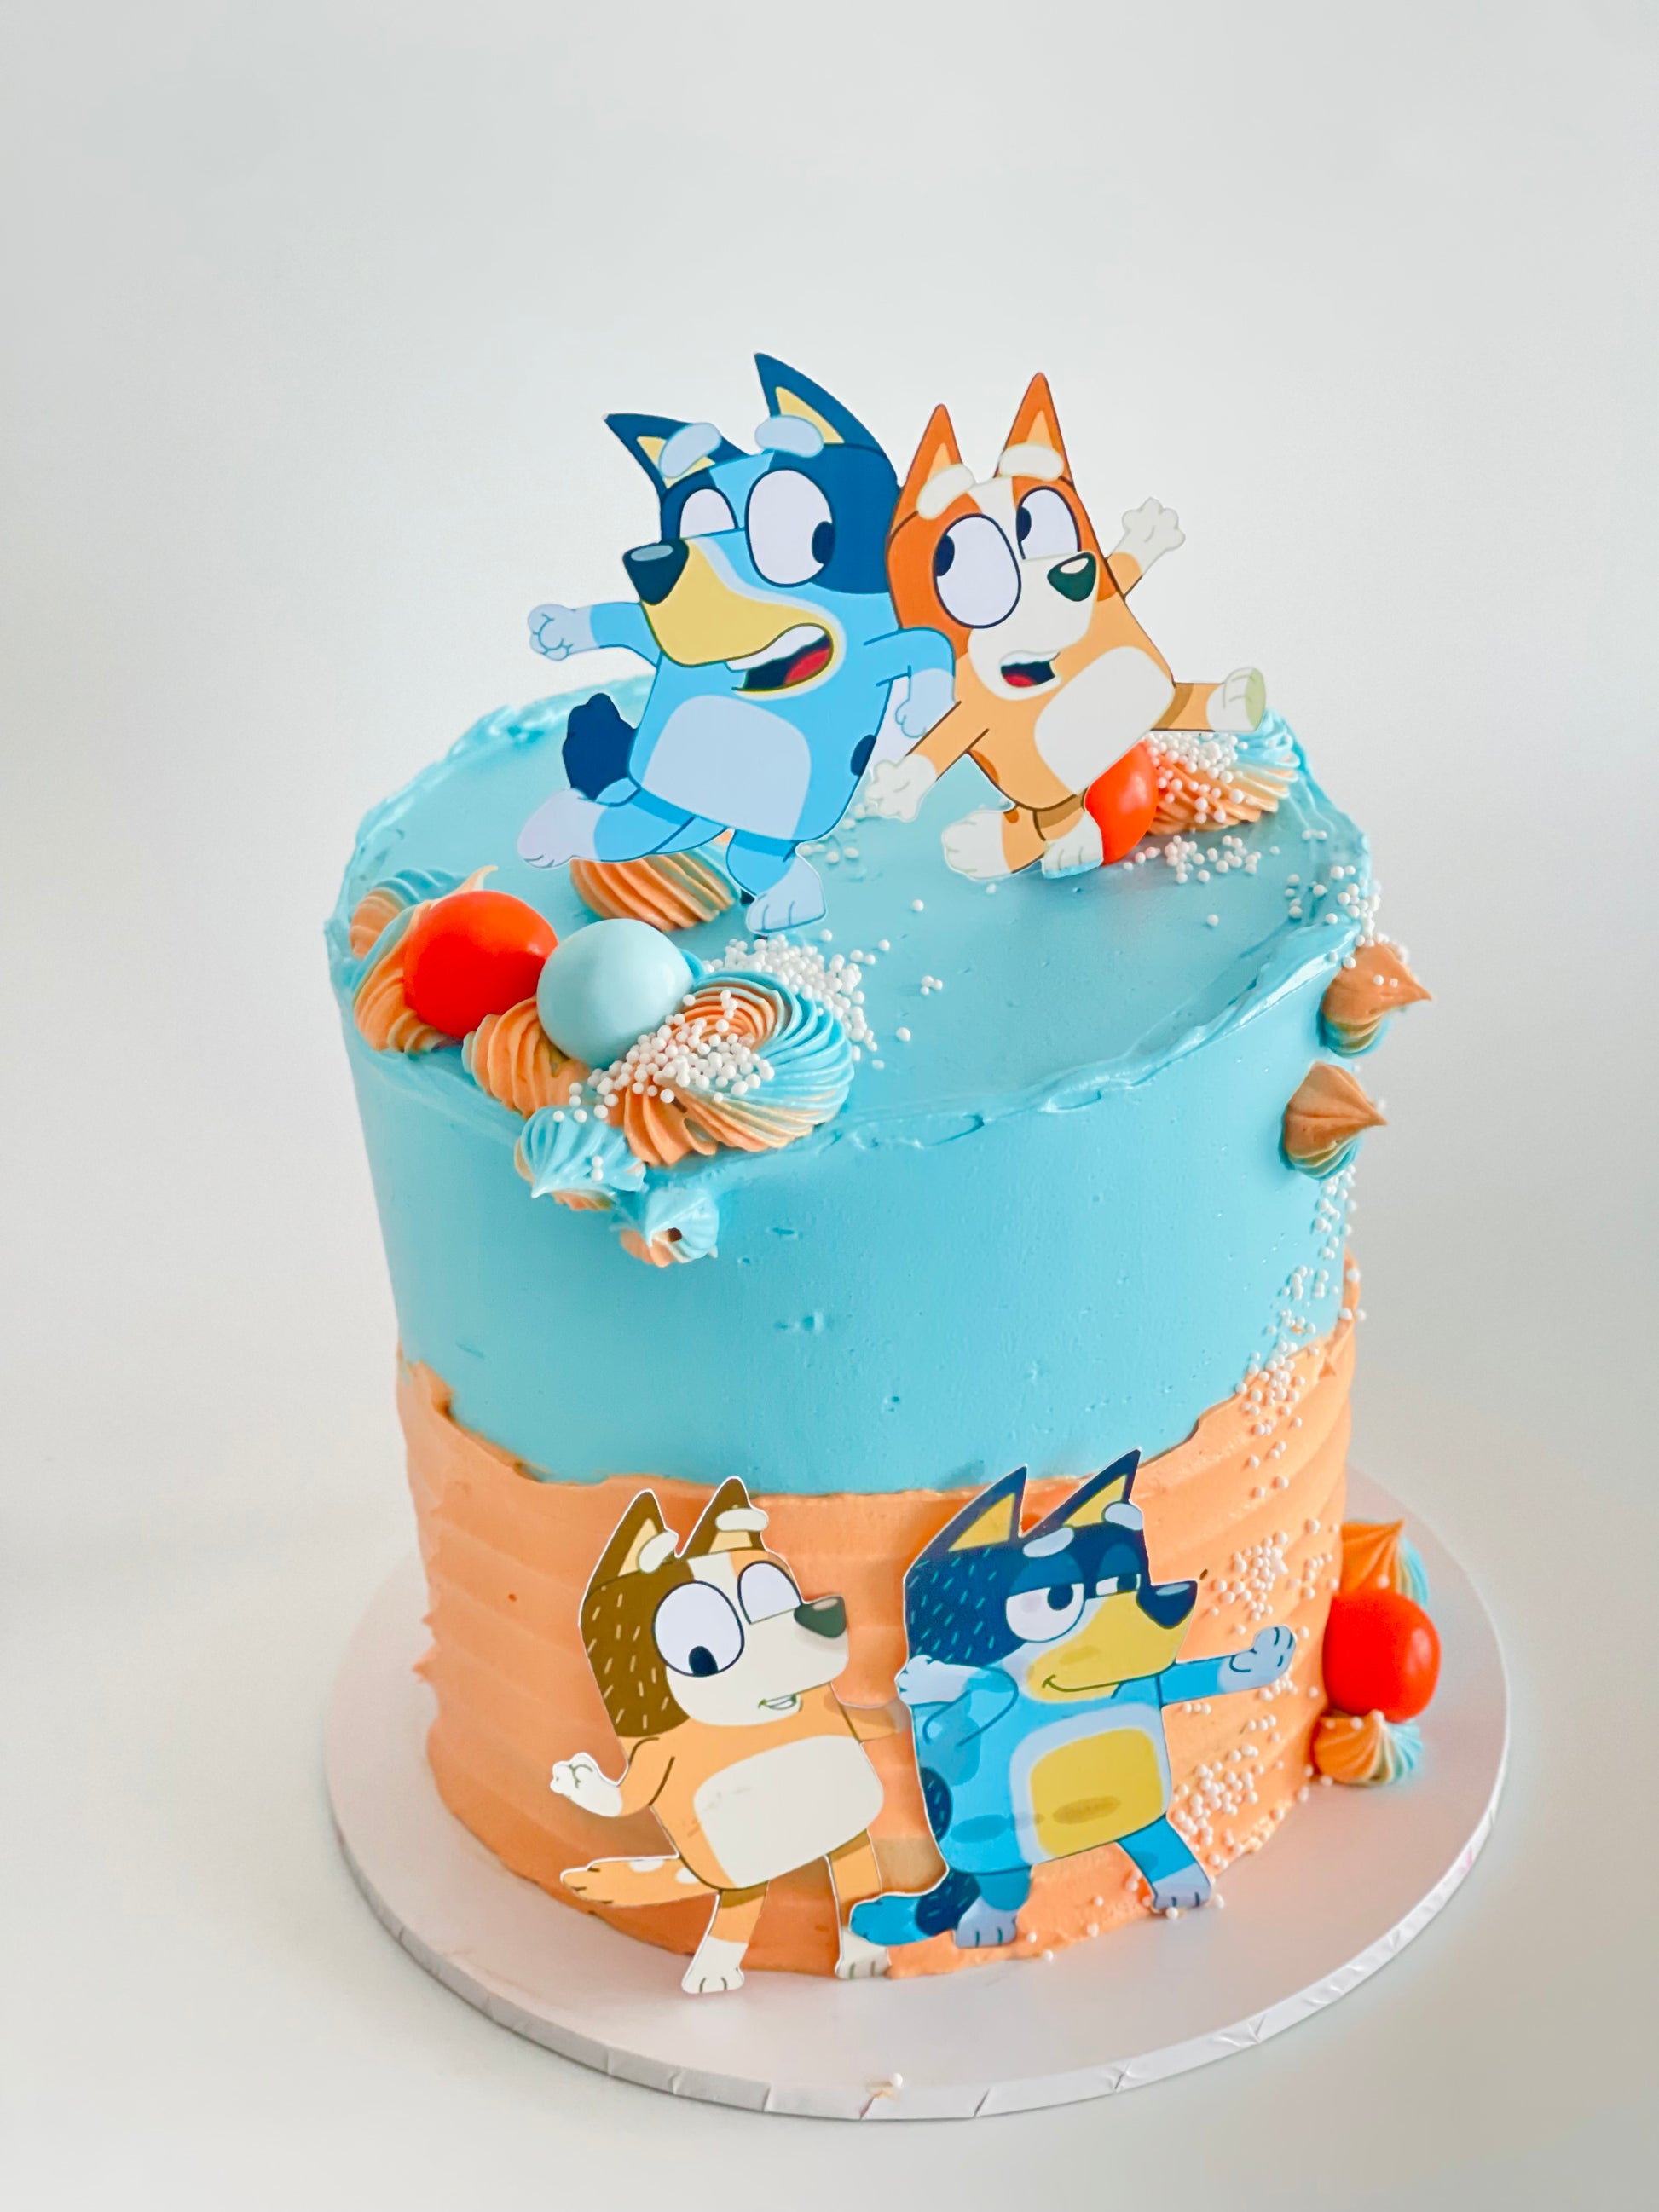 Bluey cake perfect for kids with delivery in Brisbane